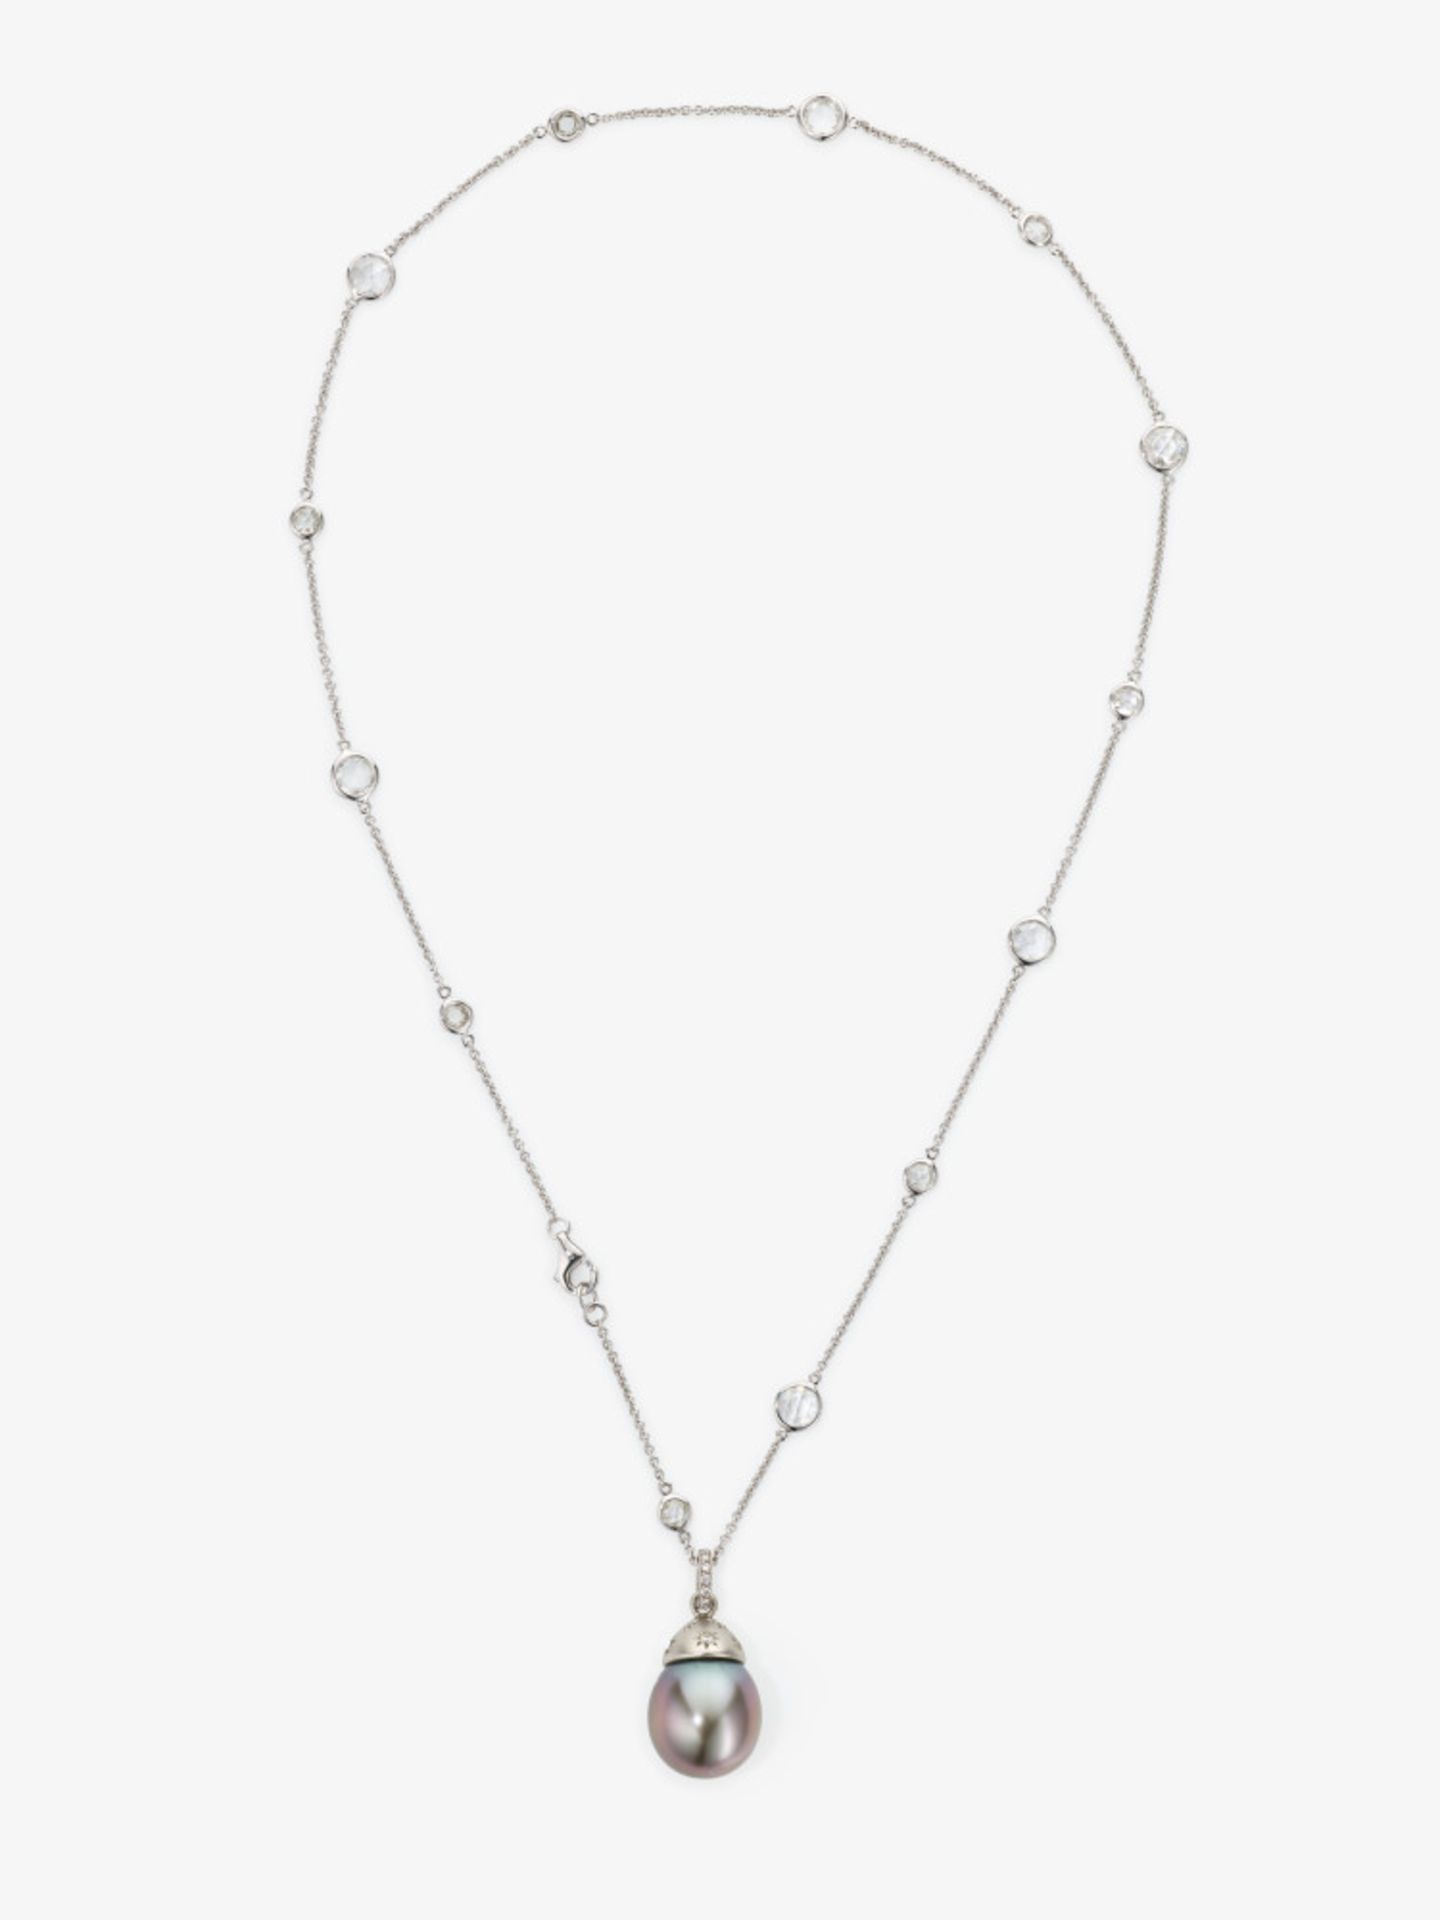 A delicate link chain necklace decorated with diamond roses and a South Sea Tahitian cultured pearl  - Image 4 of 4